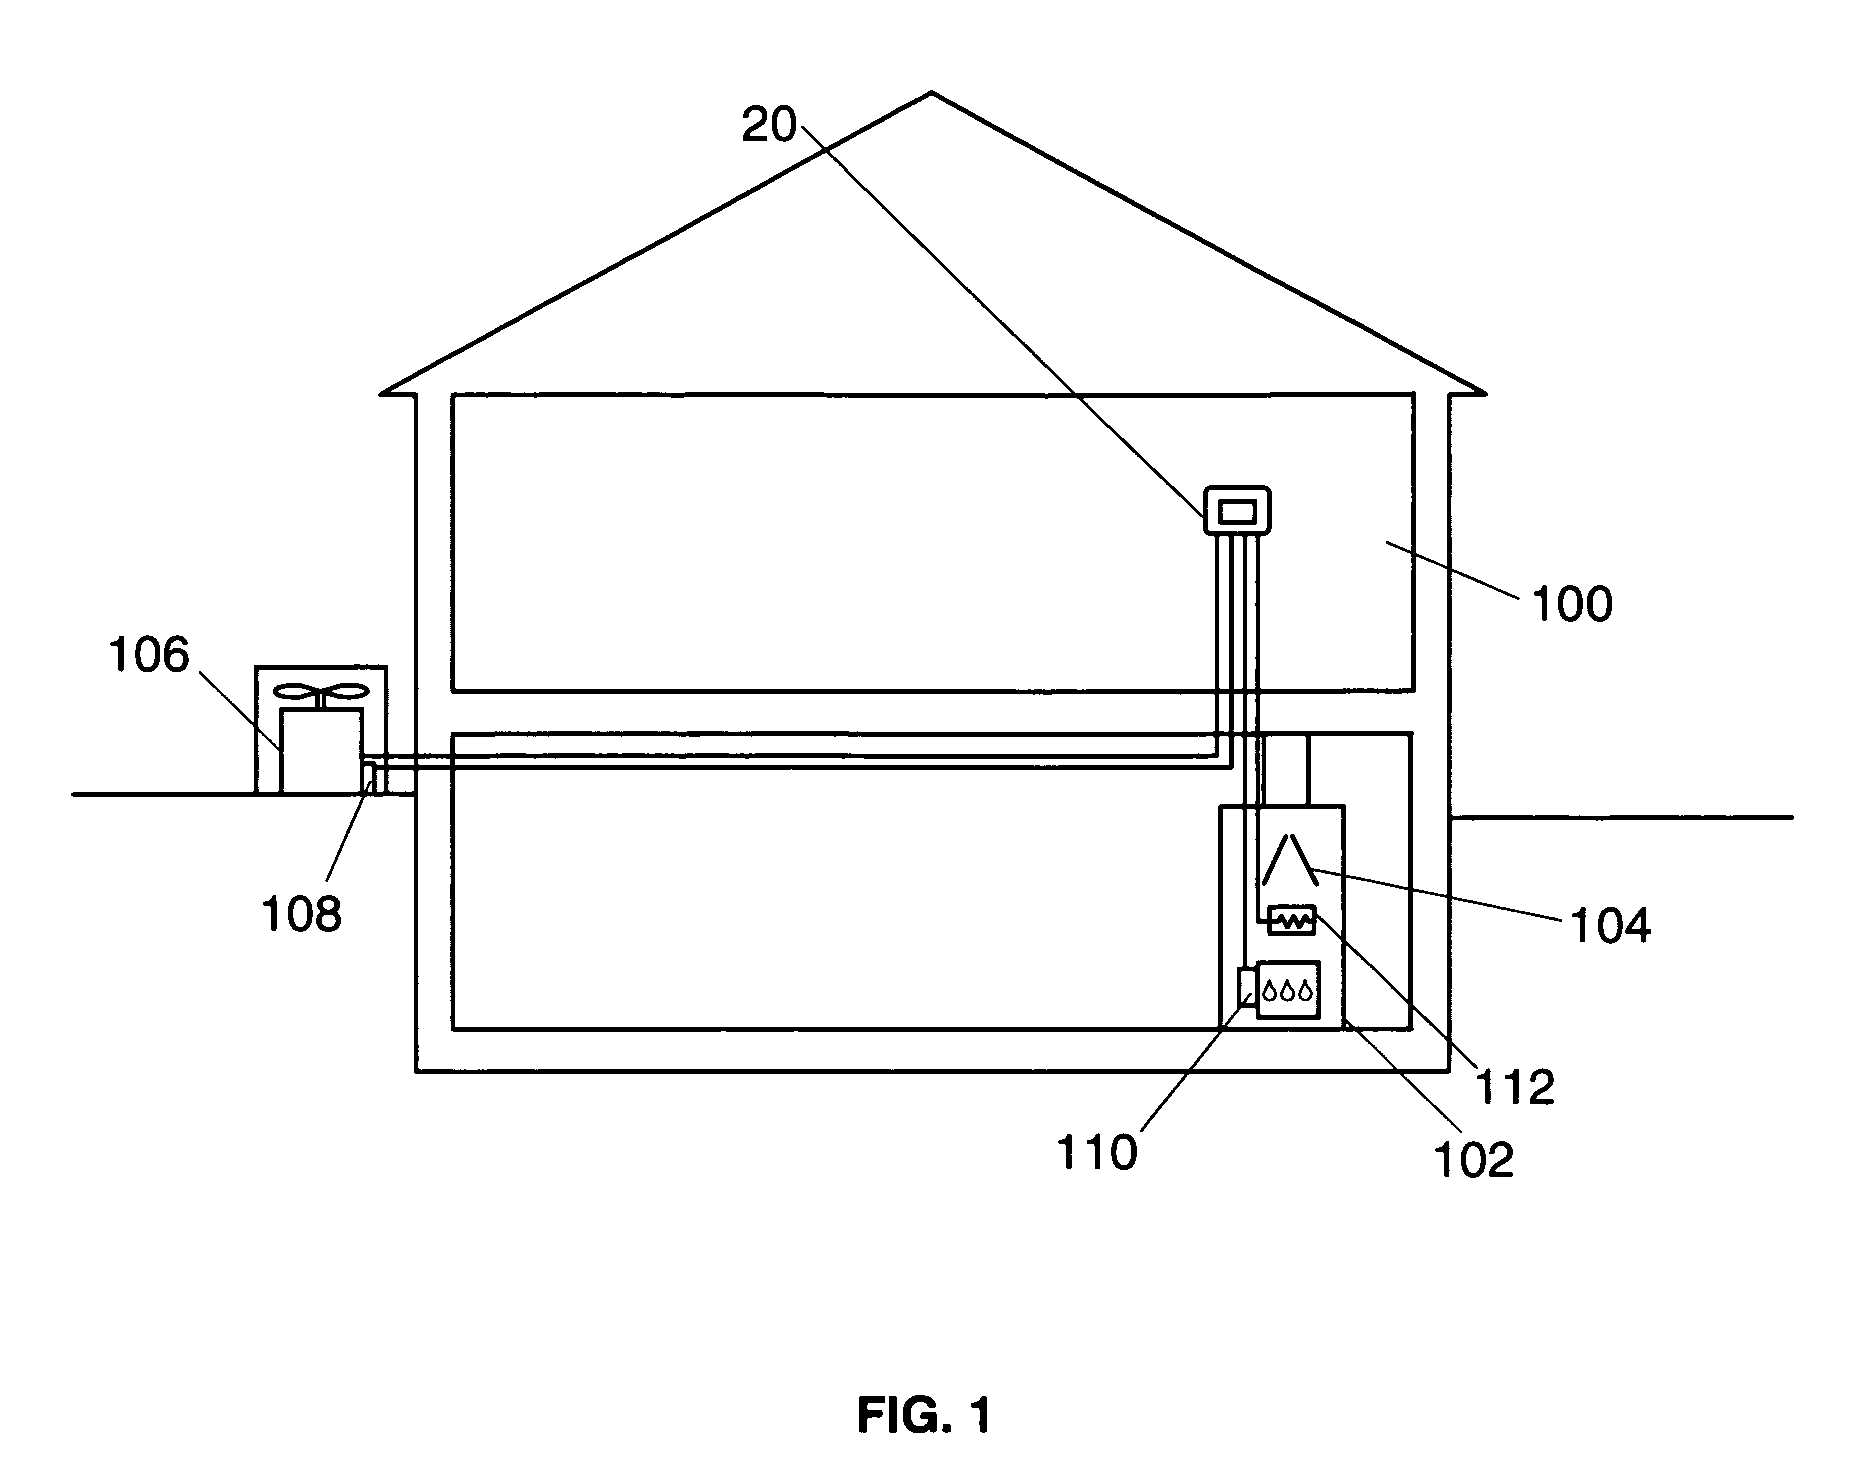 Thermostat for a heat pump or conventional heating system